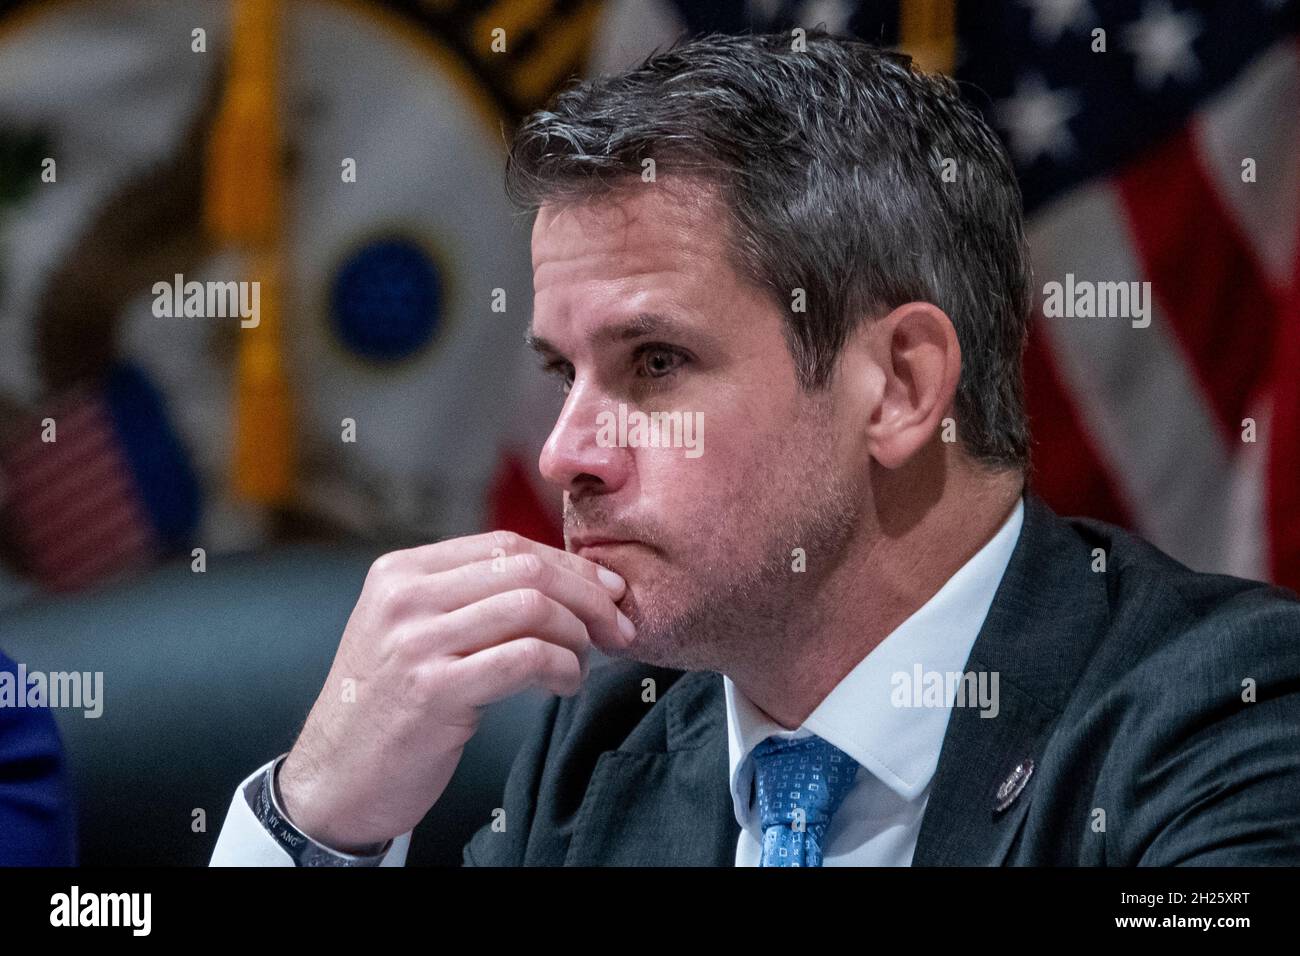 Washington, United States Of America. 19th Oct, 2021. United States Representative Adam Kinzinger (Republican of Illinois) listens as the House select committee tasked with investigating the January 6th attack on the Capitol meets to hold one of former President Donald Trump's allies in contempt, former strategist Steve Bannon in the Canon House Office Building in Washington, DC, Tuesday, October 19, 2021. Credit: Rod Lamkey/CNP/Sipa USA Credit: Sipa USA/Alamy Live News Stock Photo